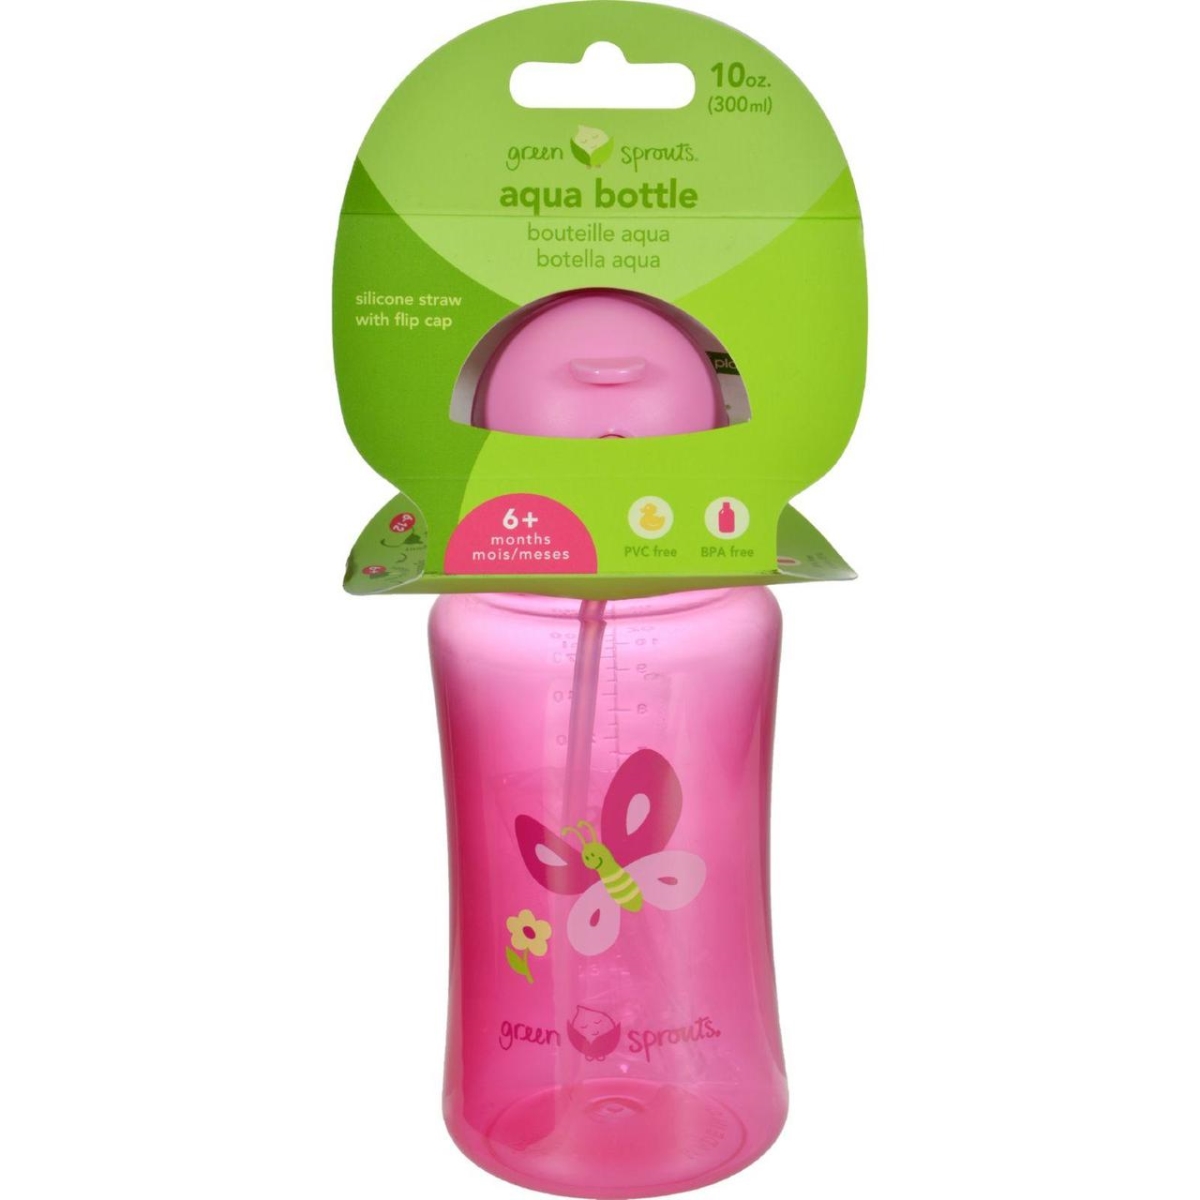 Picture of Green Sprouts HG1528983 Aqua Bottle - Pink